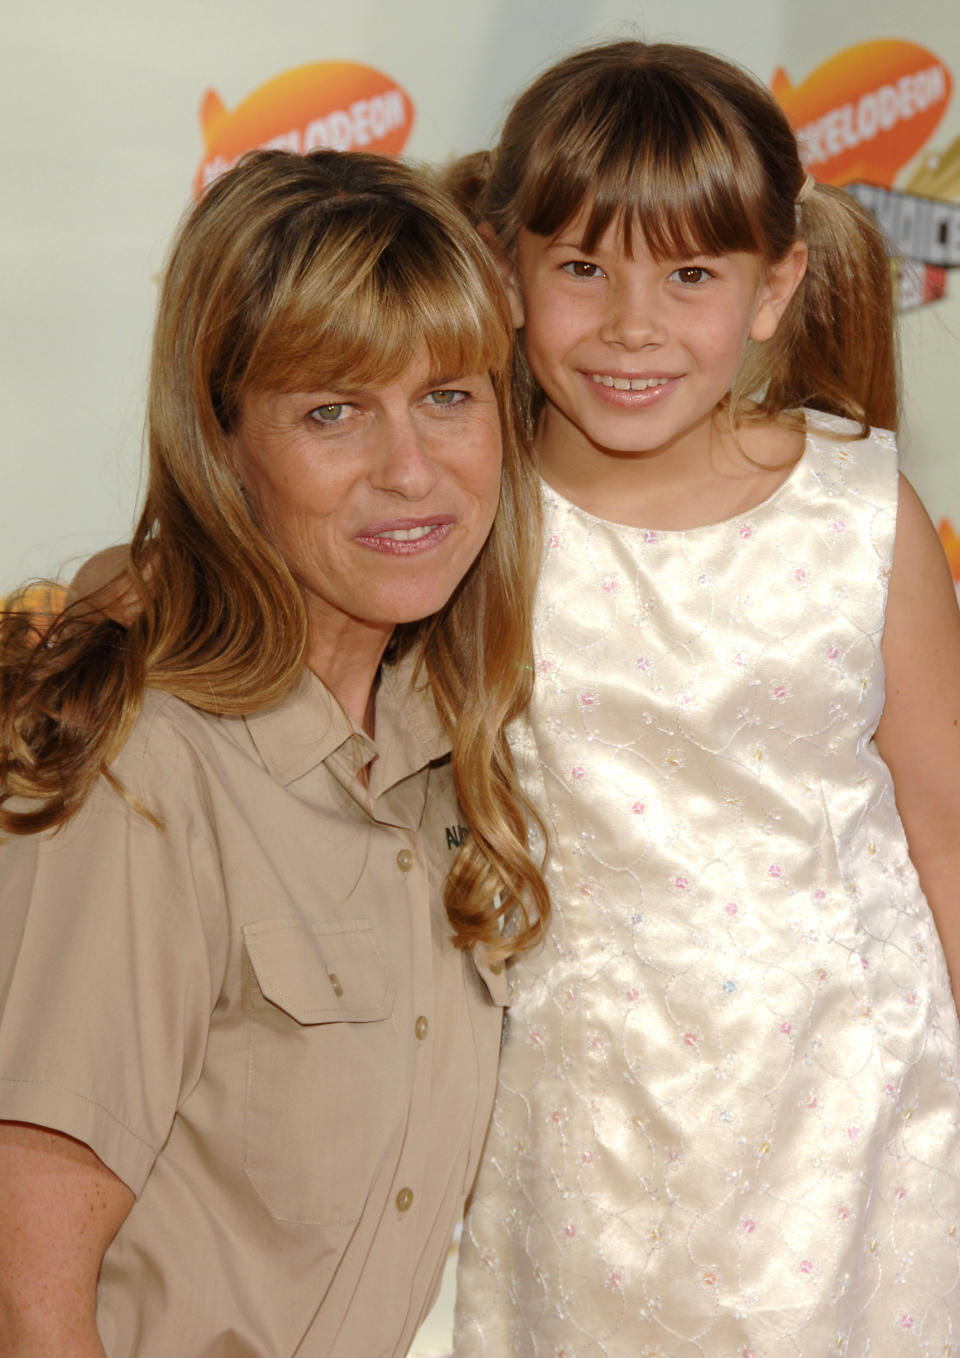 Terri Irwin and Bindi Irwin during Nickelodeon's 20th Annual Kids' Choice Awards - Arrivals at Pauley Pavilion in Westwood, California, United States. (Photo by Lester Cohen/WireImage)